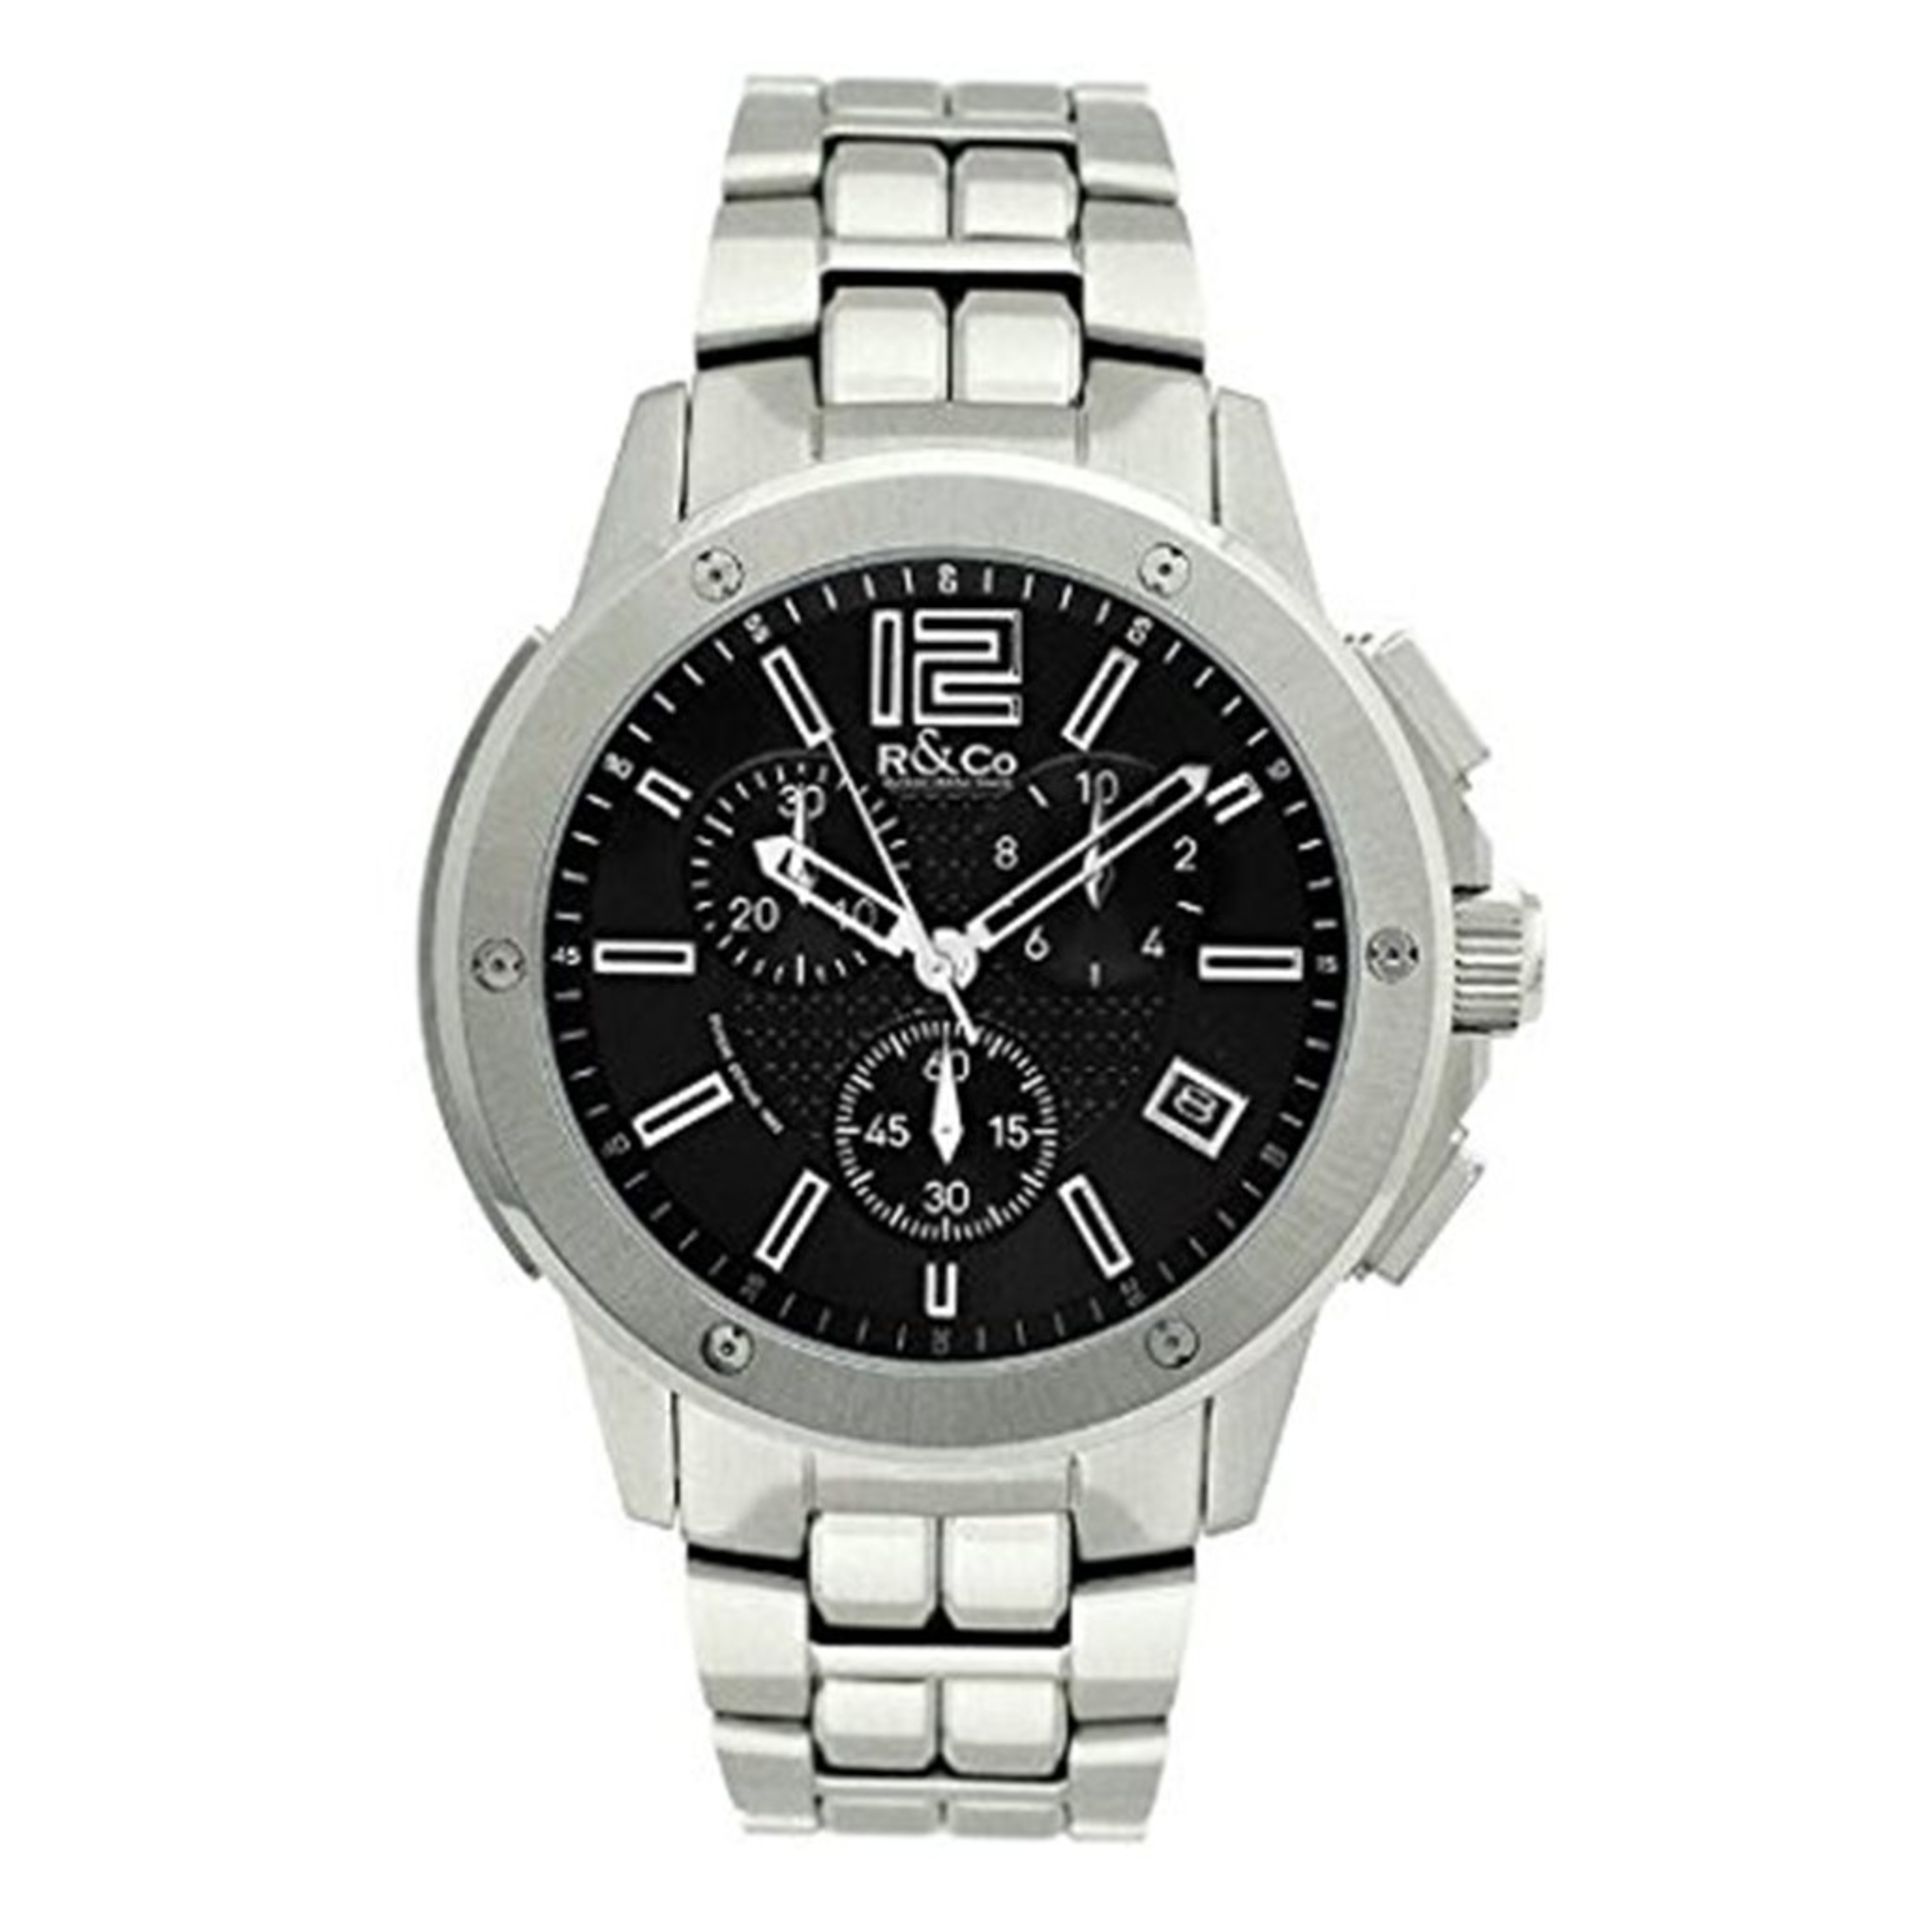 R&Co Men's Quartz Watch with Black Dial Chronograph Display and Silver Stainless Steel Bracelet RGB0